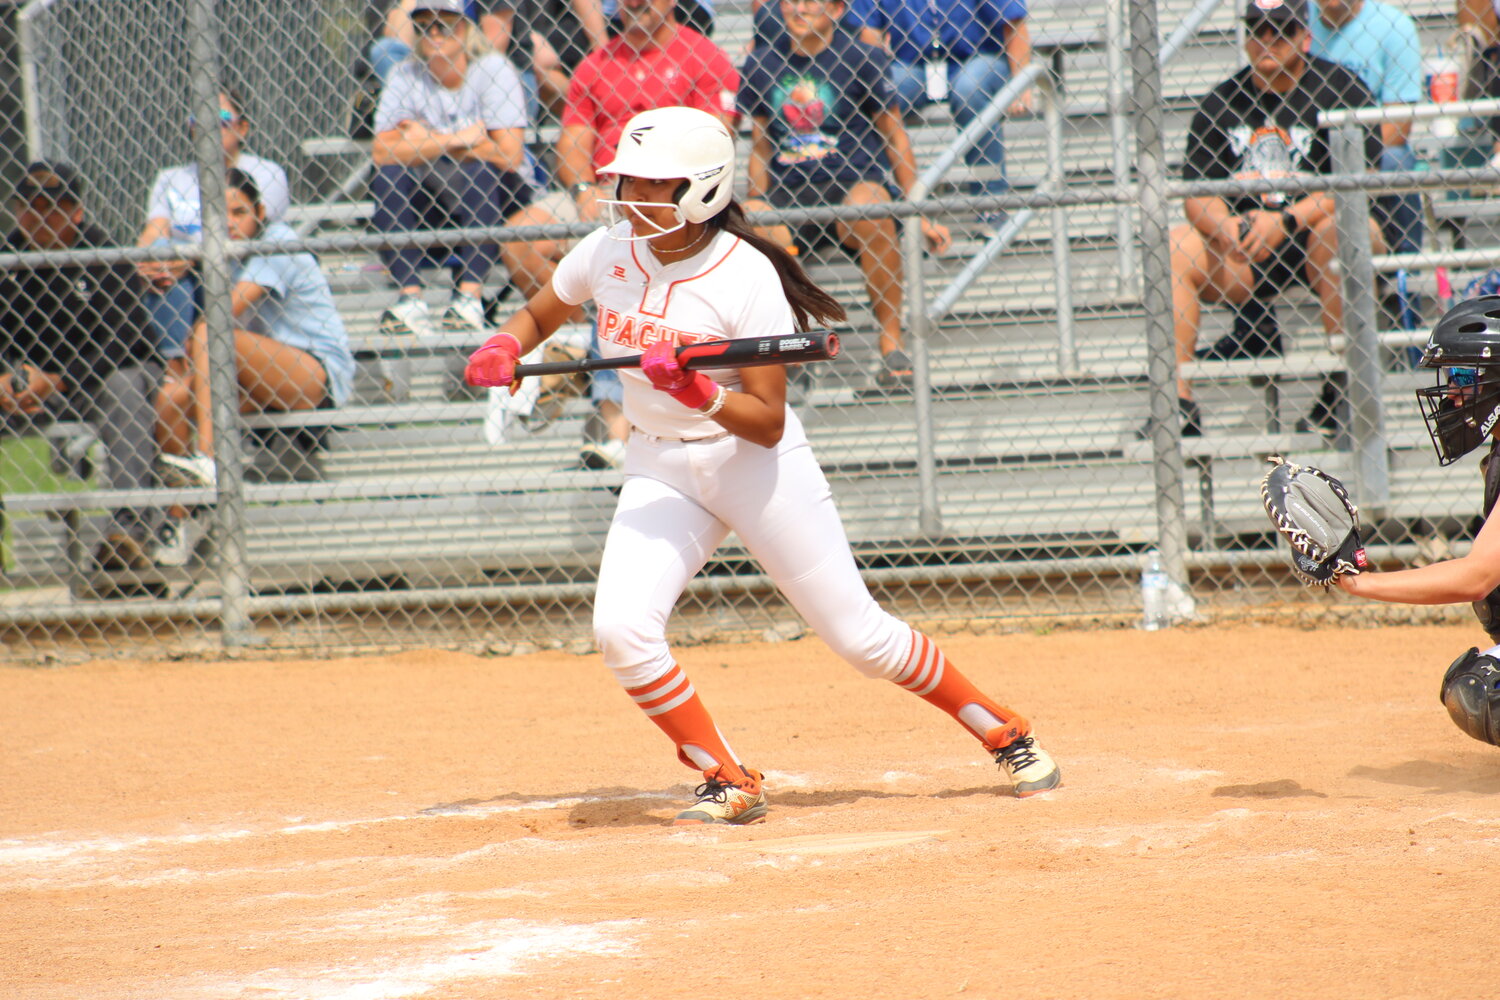 Sophomore Ava Carrizales (2) at bat for the Lady Apaches against La Vernia in district opener Tuesday, March 12.